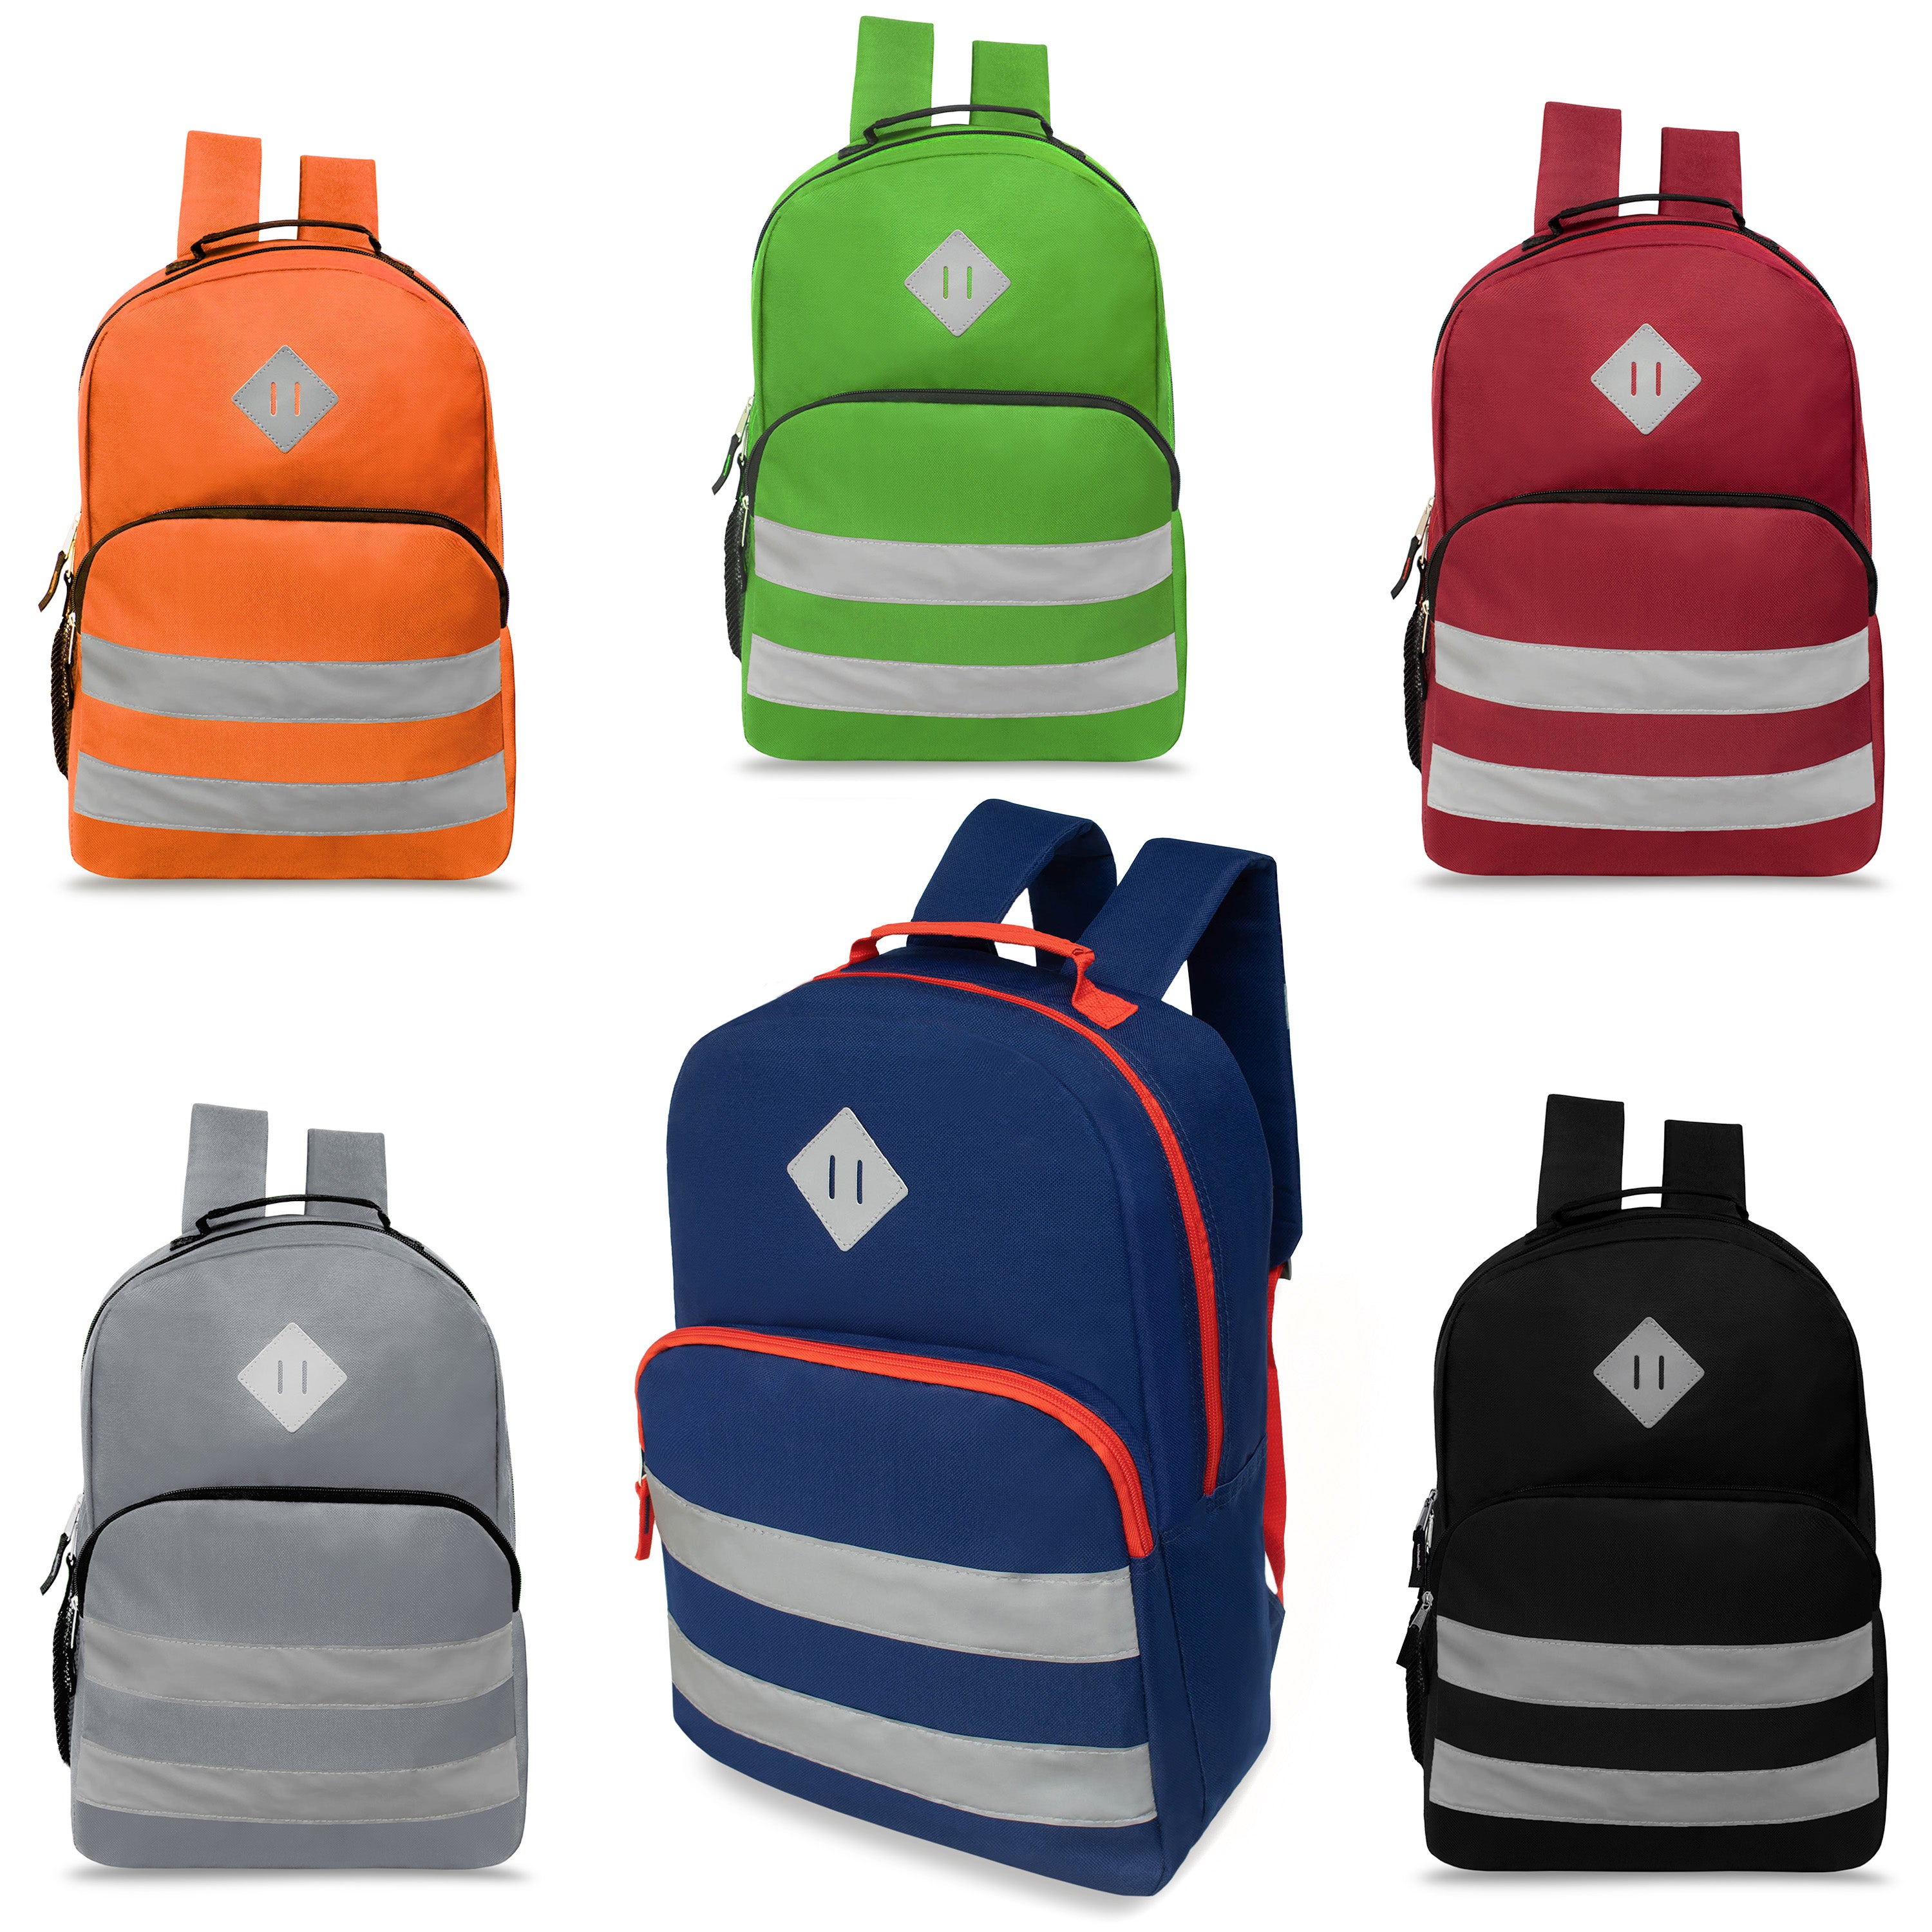 17" Double Reflective Wholesale Backpack in 6 Colors - Bulk Case of 24